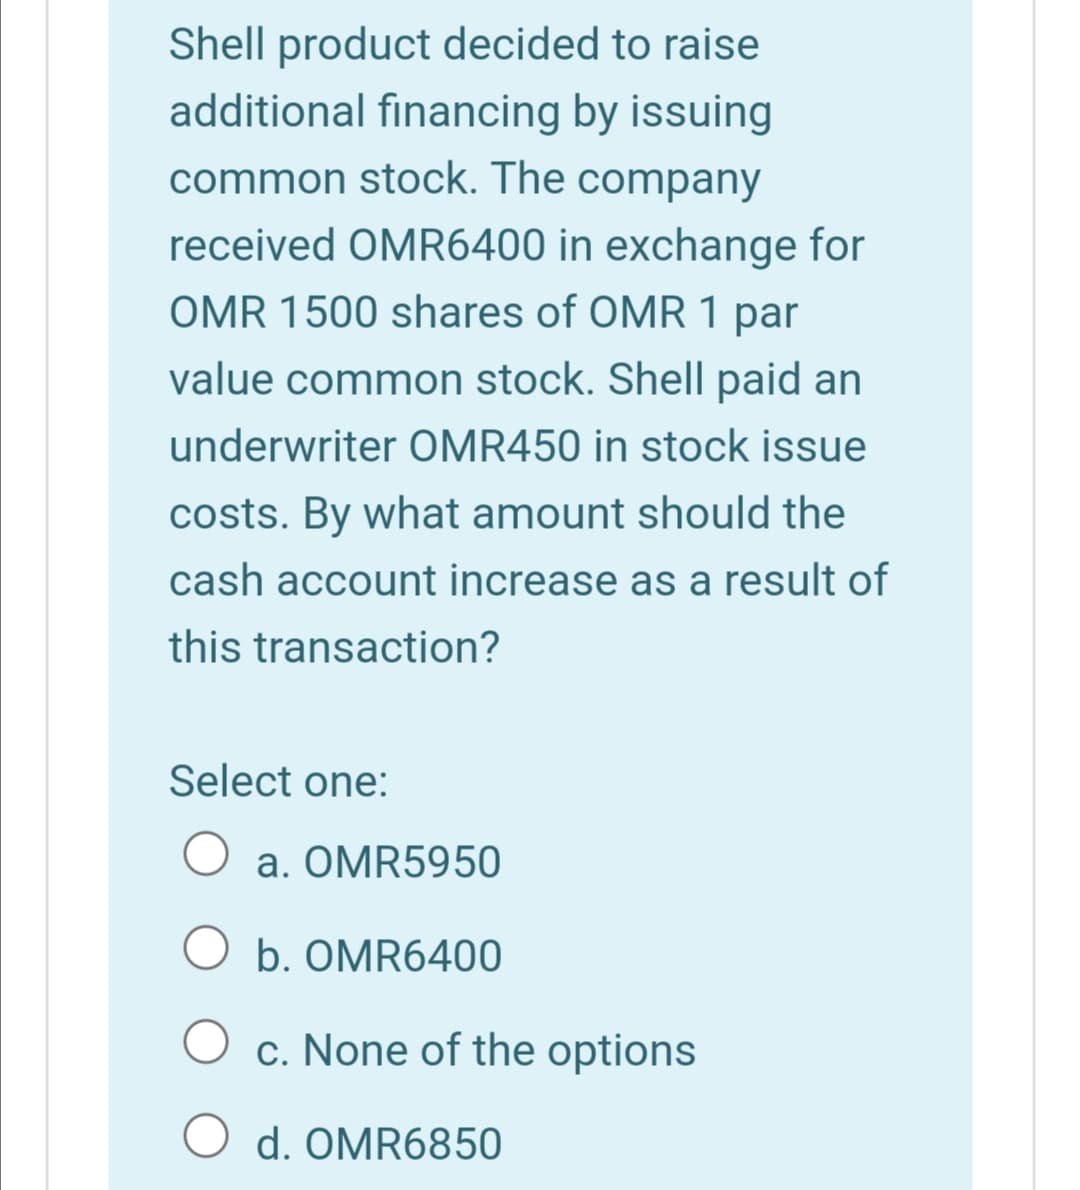 Shell product decided to raise
additional financing by issuing
common stock. The company
received OMR6400 in exchange for
OMR 1500 shares of OMR 1 par
value common stock. Shell paid an
underwriter OMR450 in stock issue
costs. By what amount should the
cash account increase as a result of
this transaction?
Select one:
a. OMR5950
O b. OMR6400
c. None of the options
d. OMR6850
